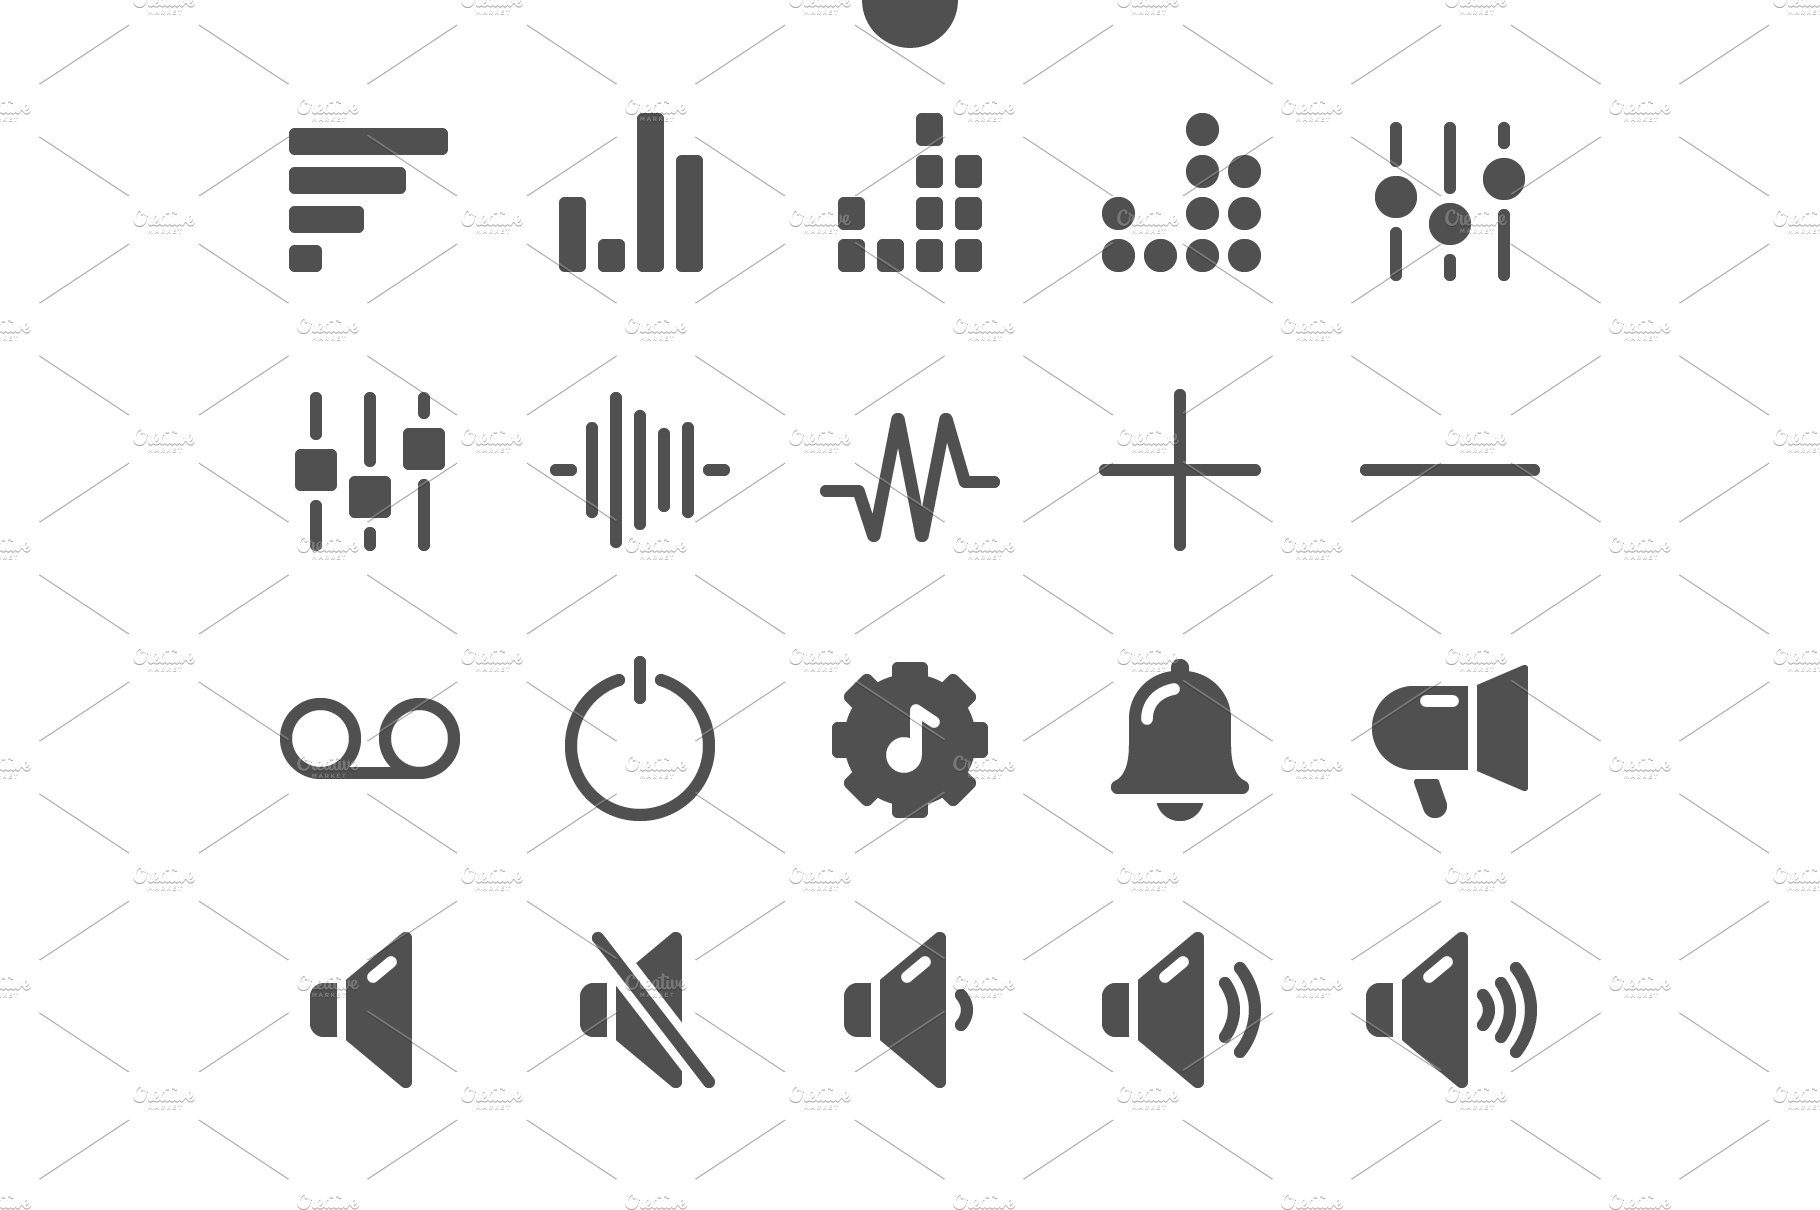 Audio_Video Icons cover image.